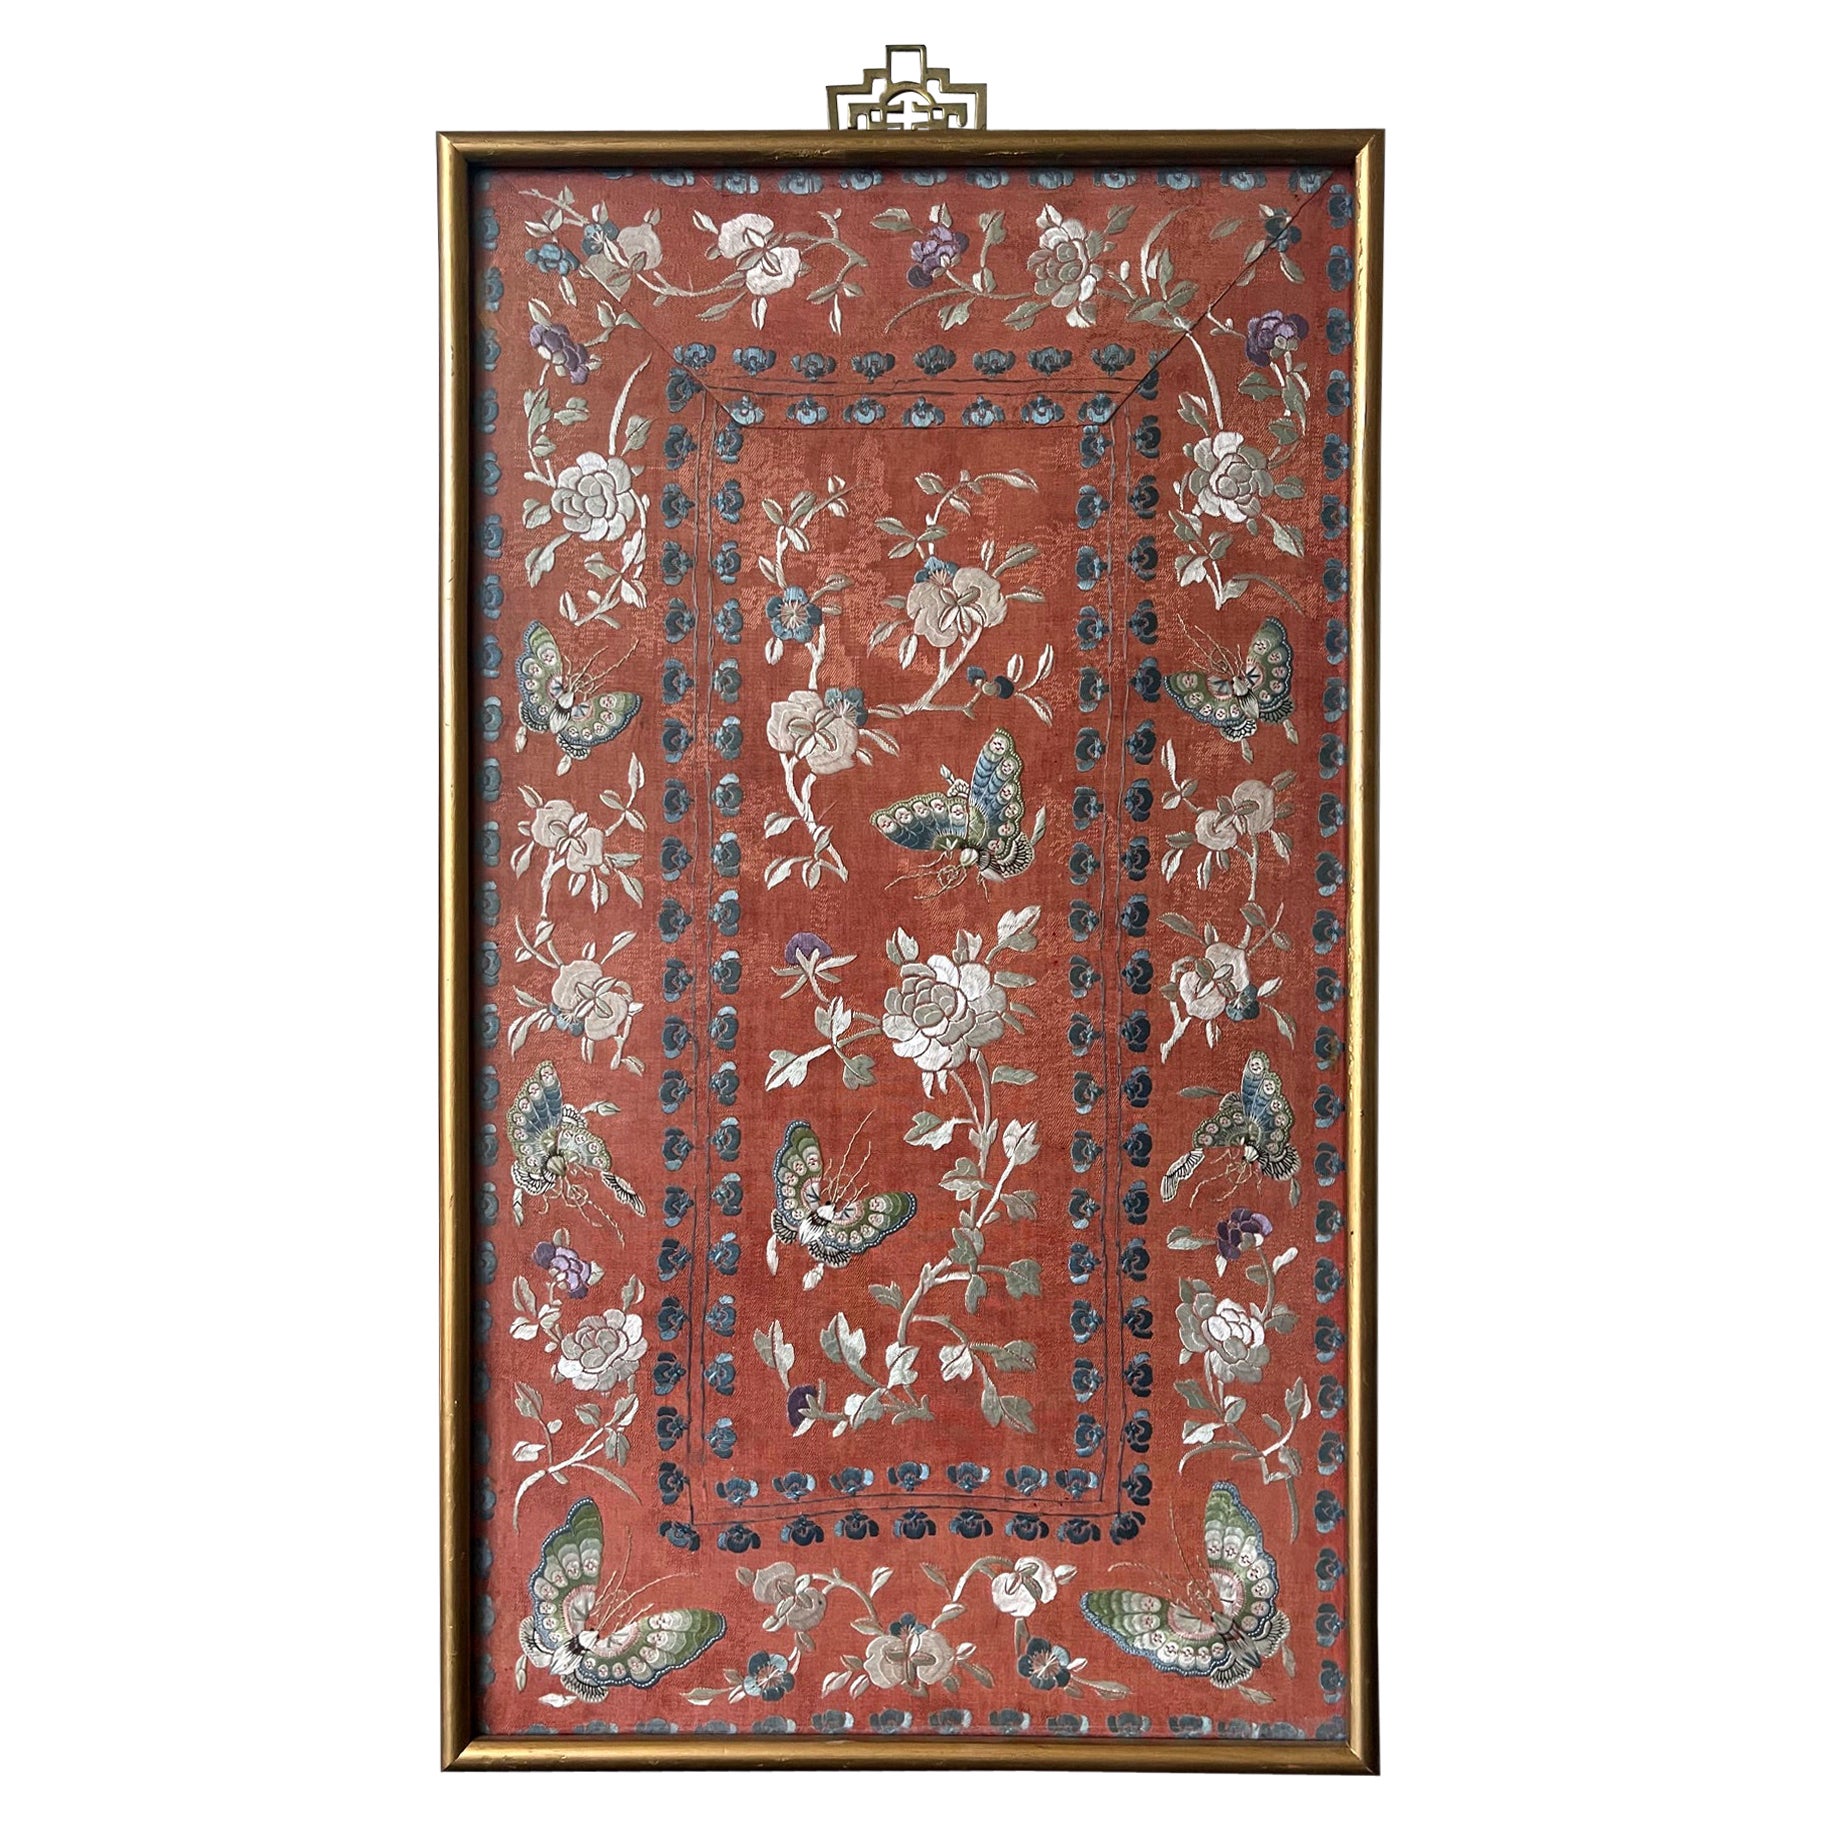 Exhibited Framed Fine Chinese Embroidery Silk Panel Qing Dynasty